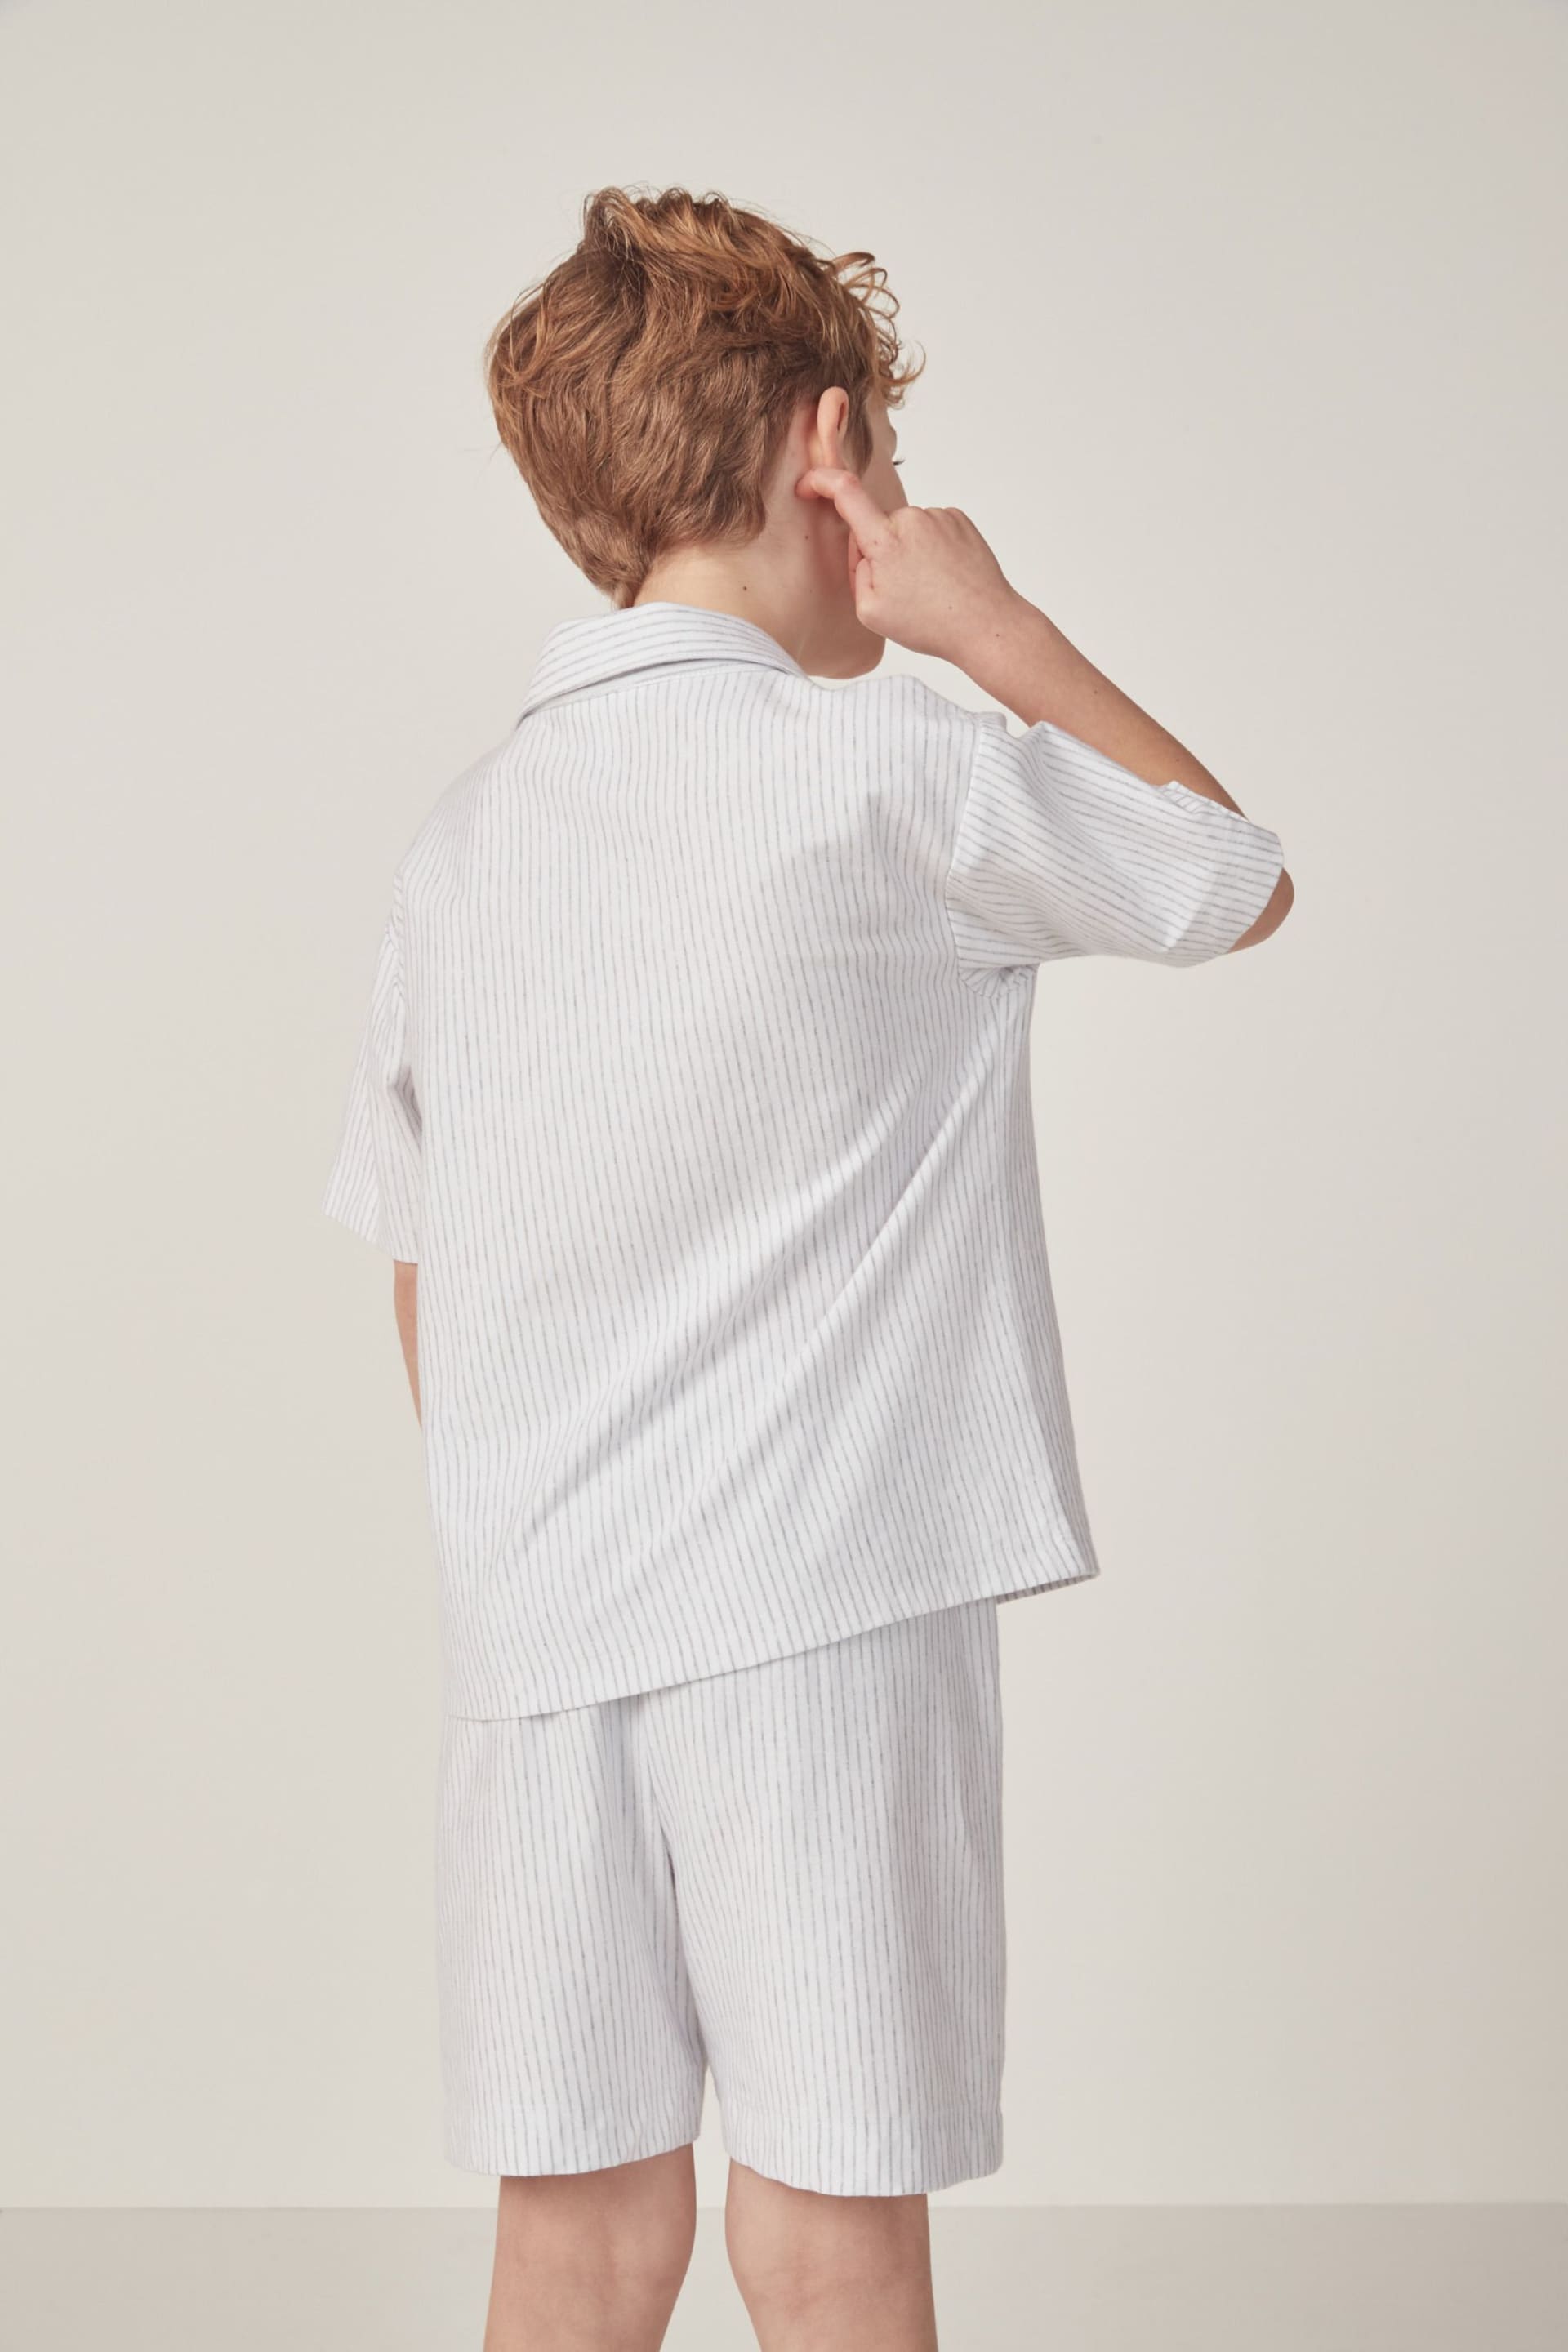 The White Company White Cotton Classic Sailboat Embroidered Shortie Pyjamas - Image 2 of 6